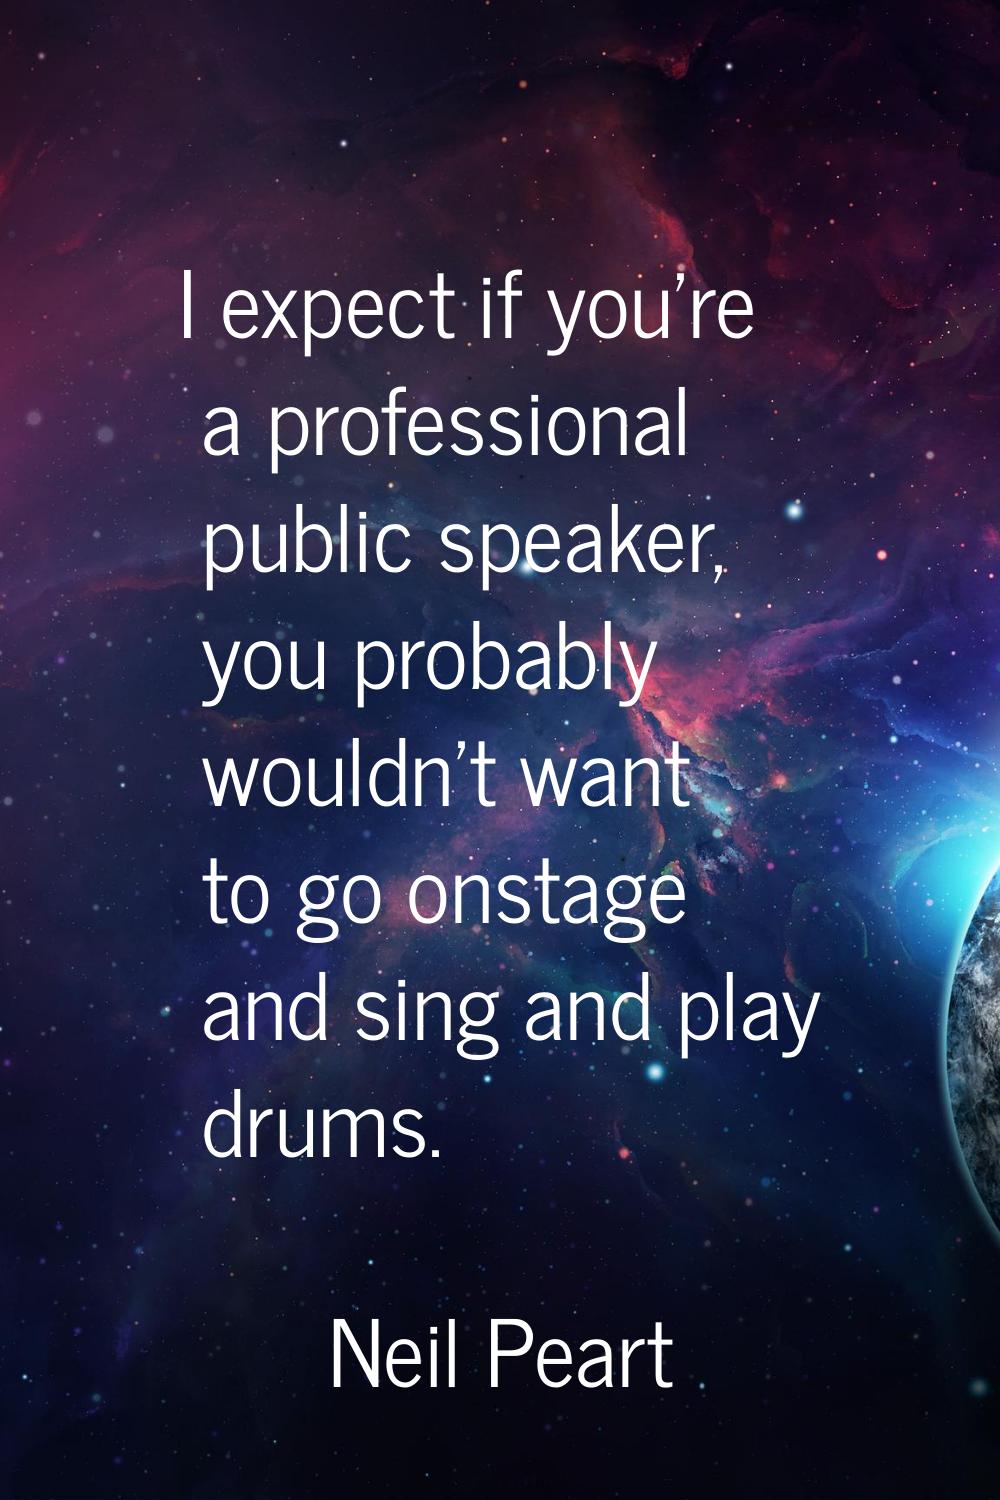 I expect if you're a professional public speaker, you probably wouldn't want to go onstage and sing